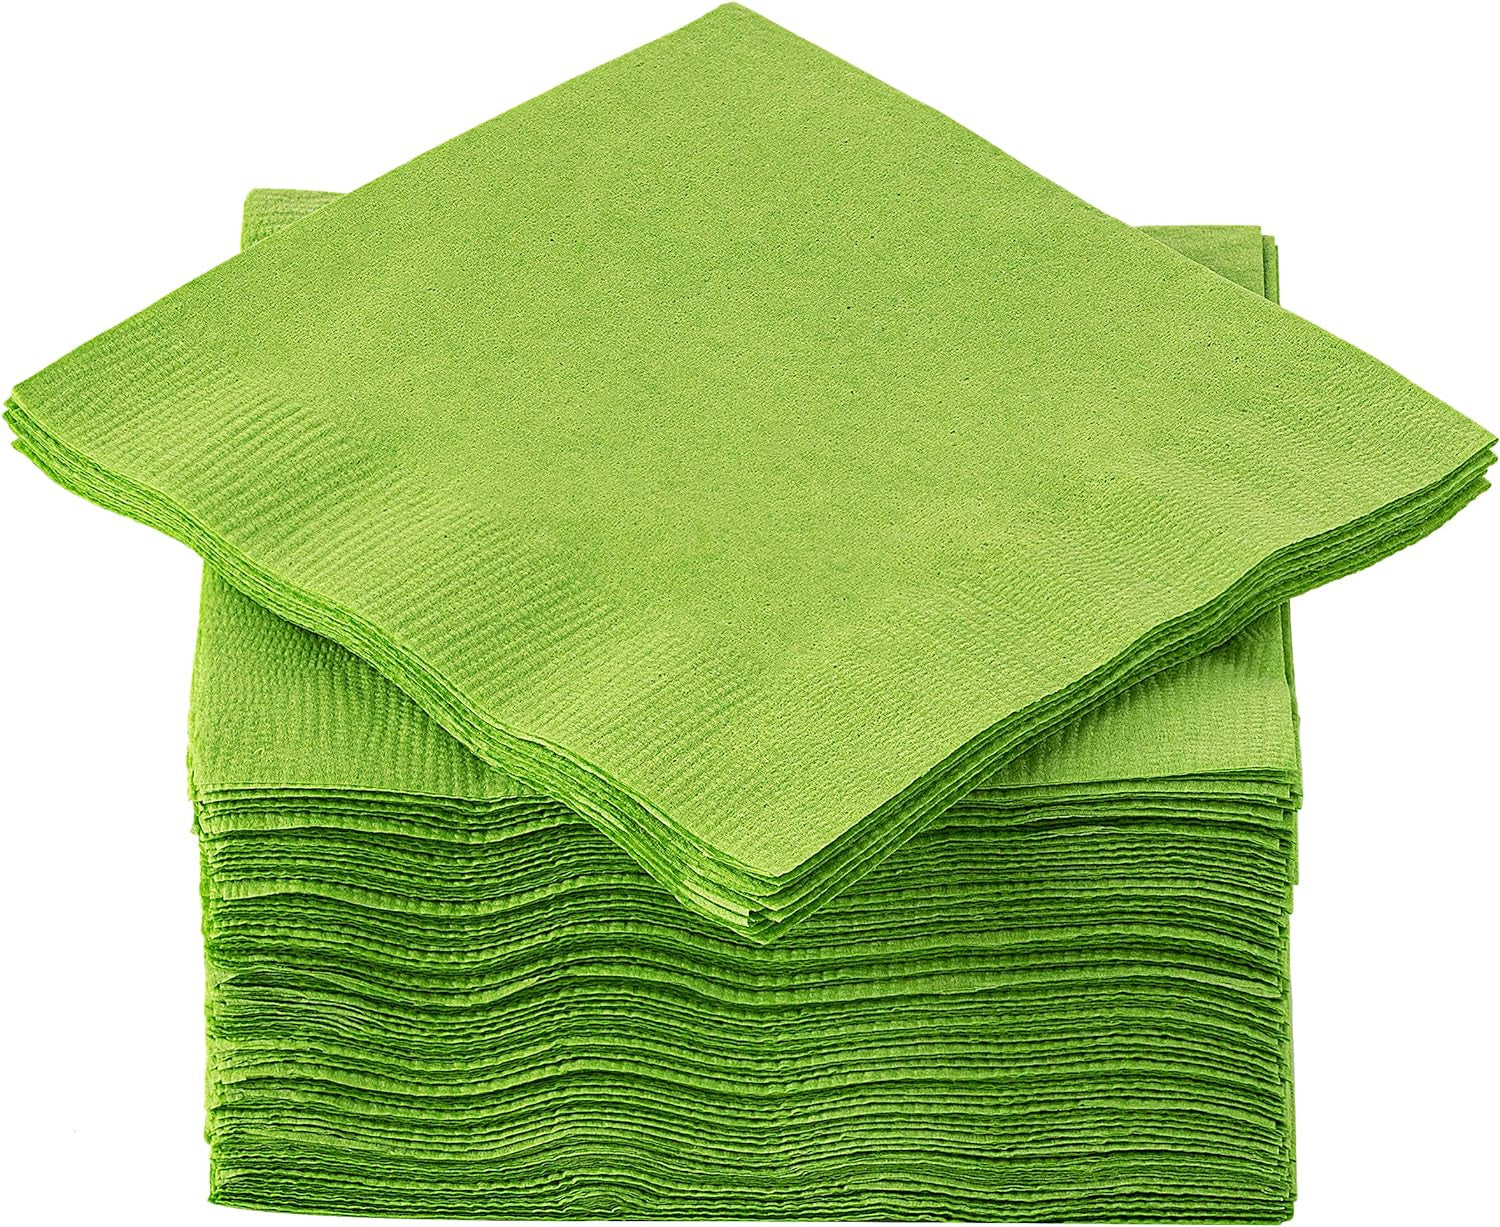 200 Count 2 Ply Plain White Beverage Napkins Disposable Four Fold Cocktails  Paper Napkins 9.8 X 9.8 unfolded for Party and Every Day Use